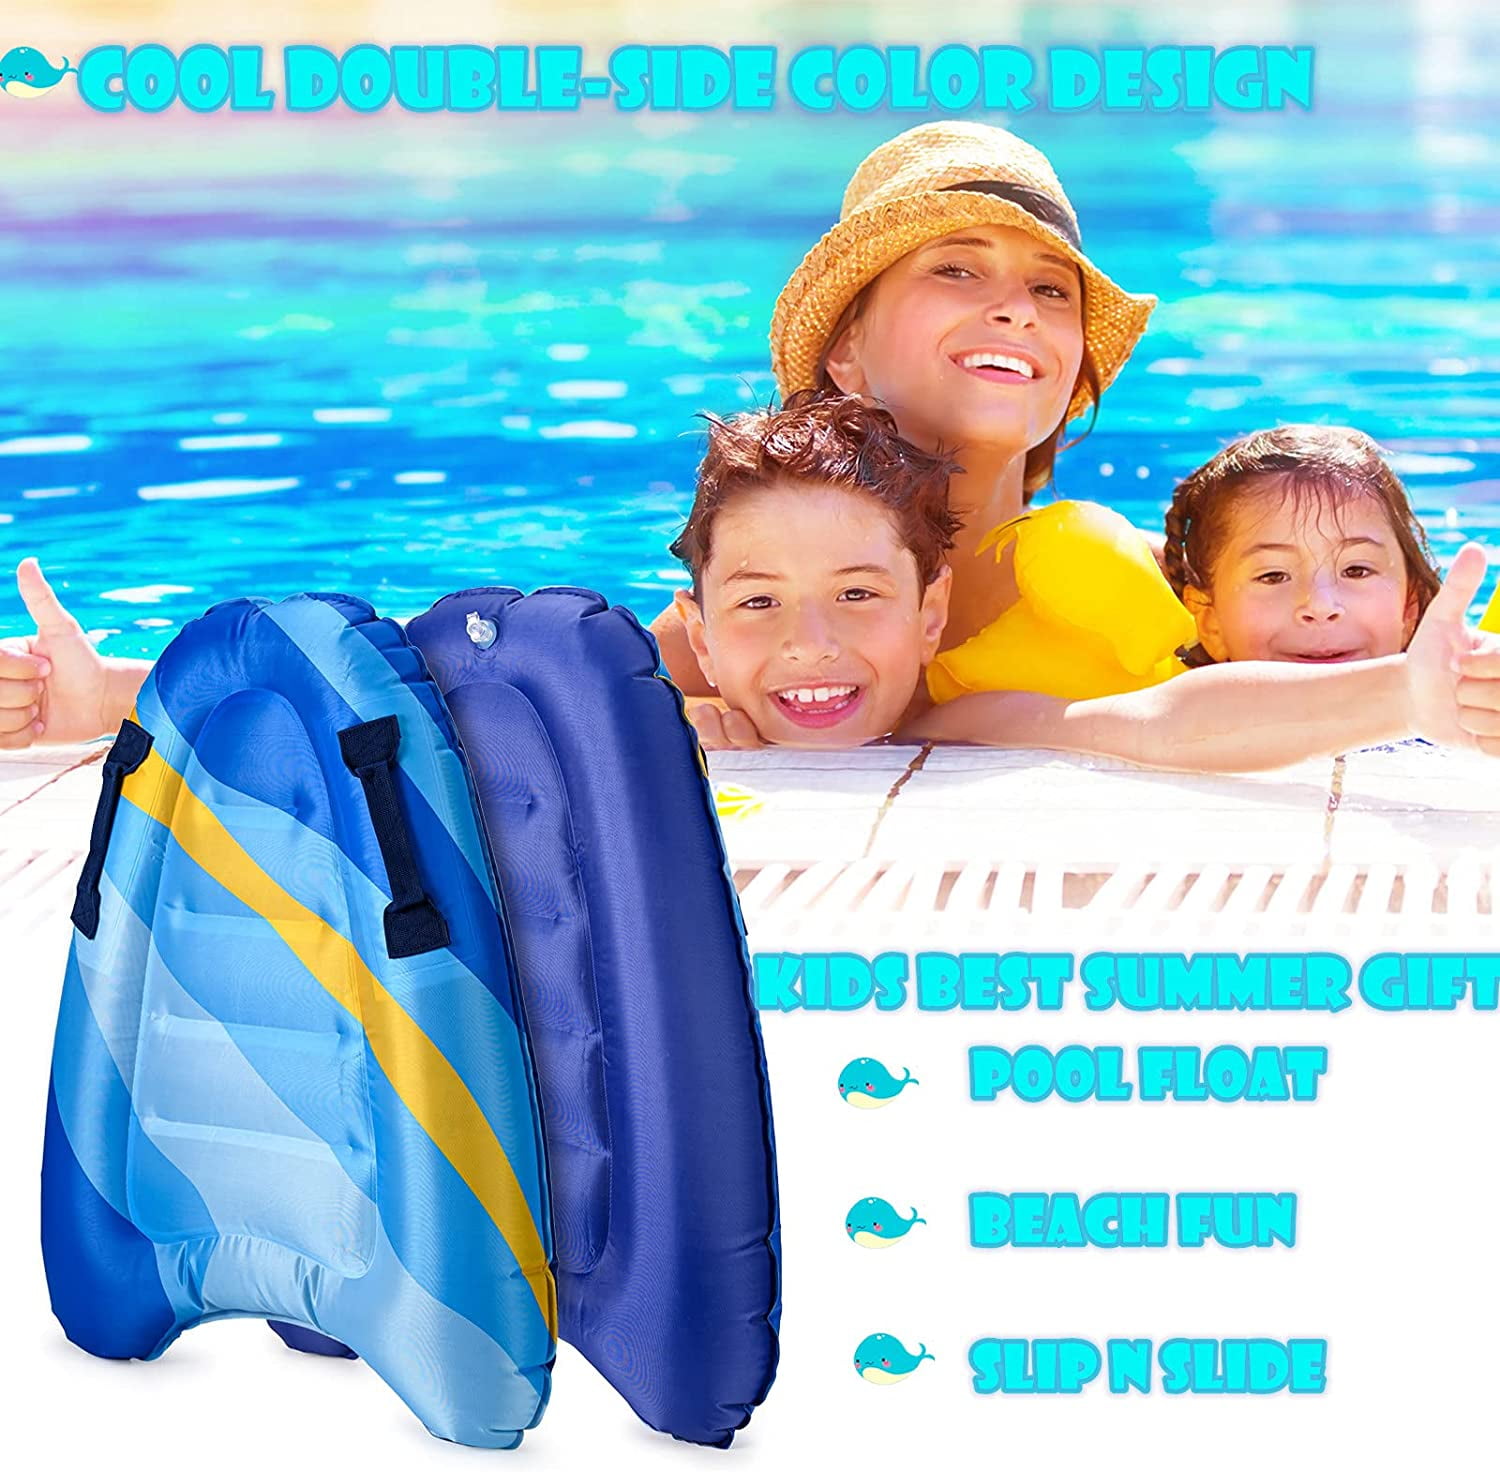 Inflatable surfboard portable for kids,for Surfing adshi Inflatable bodyboard kids,Inflatable surfboard for water slides Adults,Children,Beginner Poolfloat of Swimming 